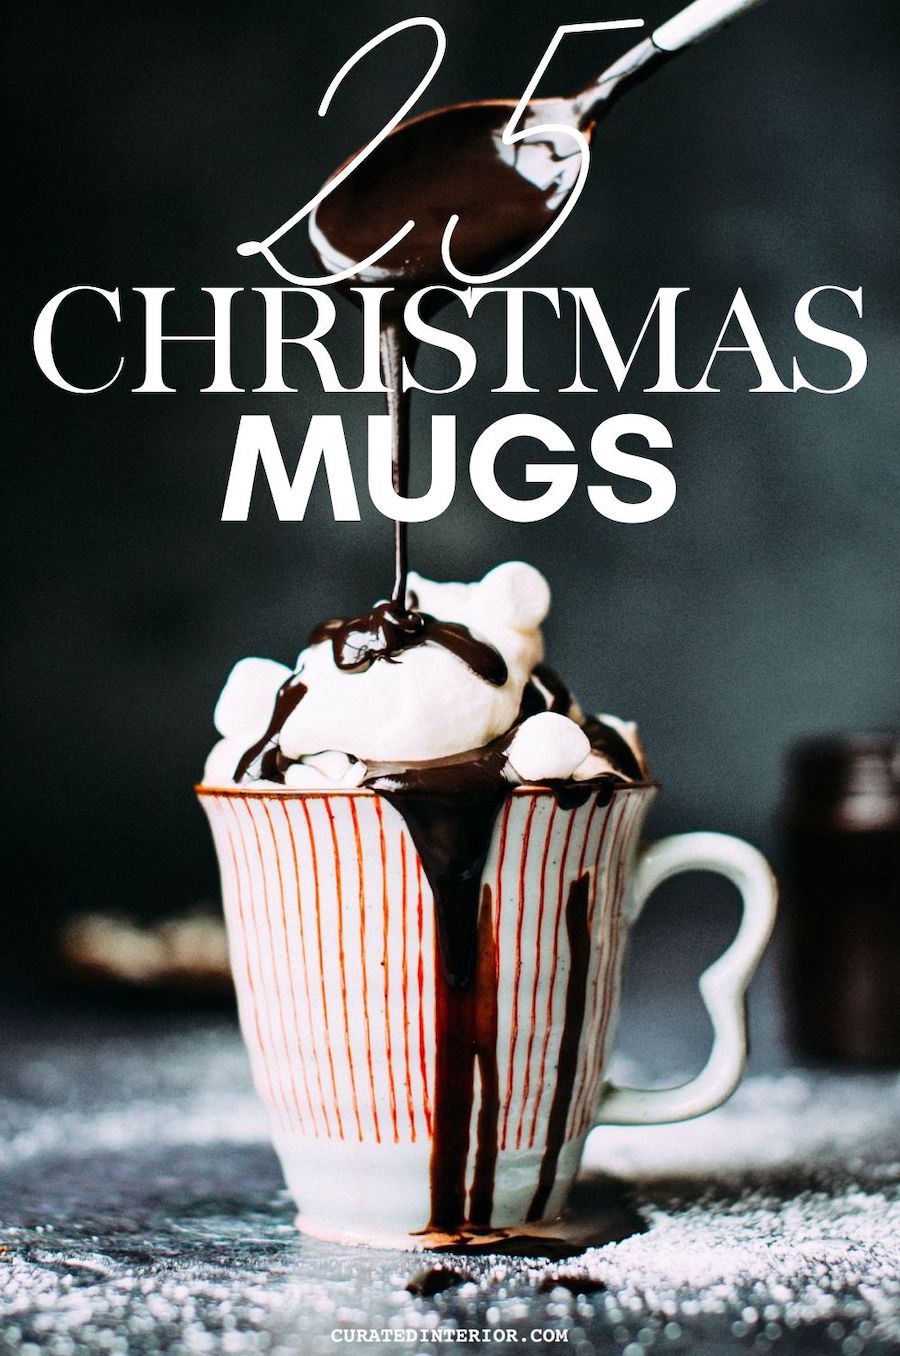 25 Best Christmas Mugs for a Festive Holiday Season and Cheerful start to your morning this year! #mugs